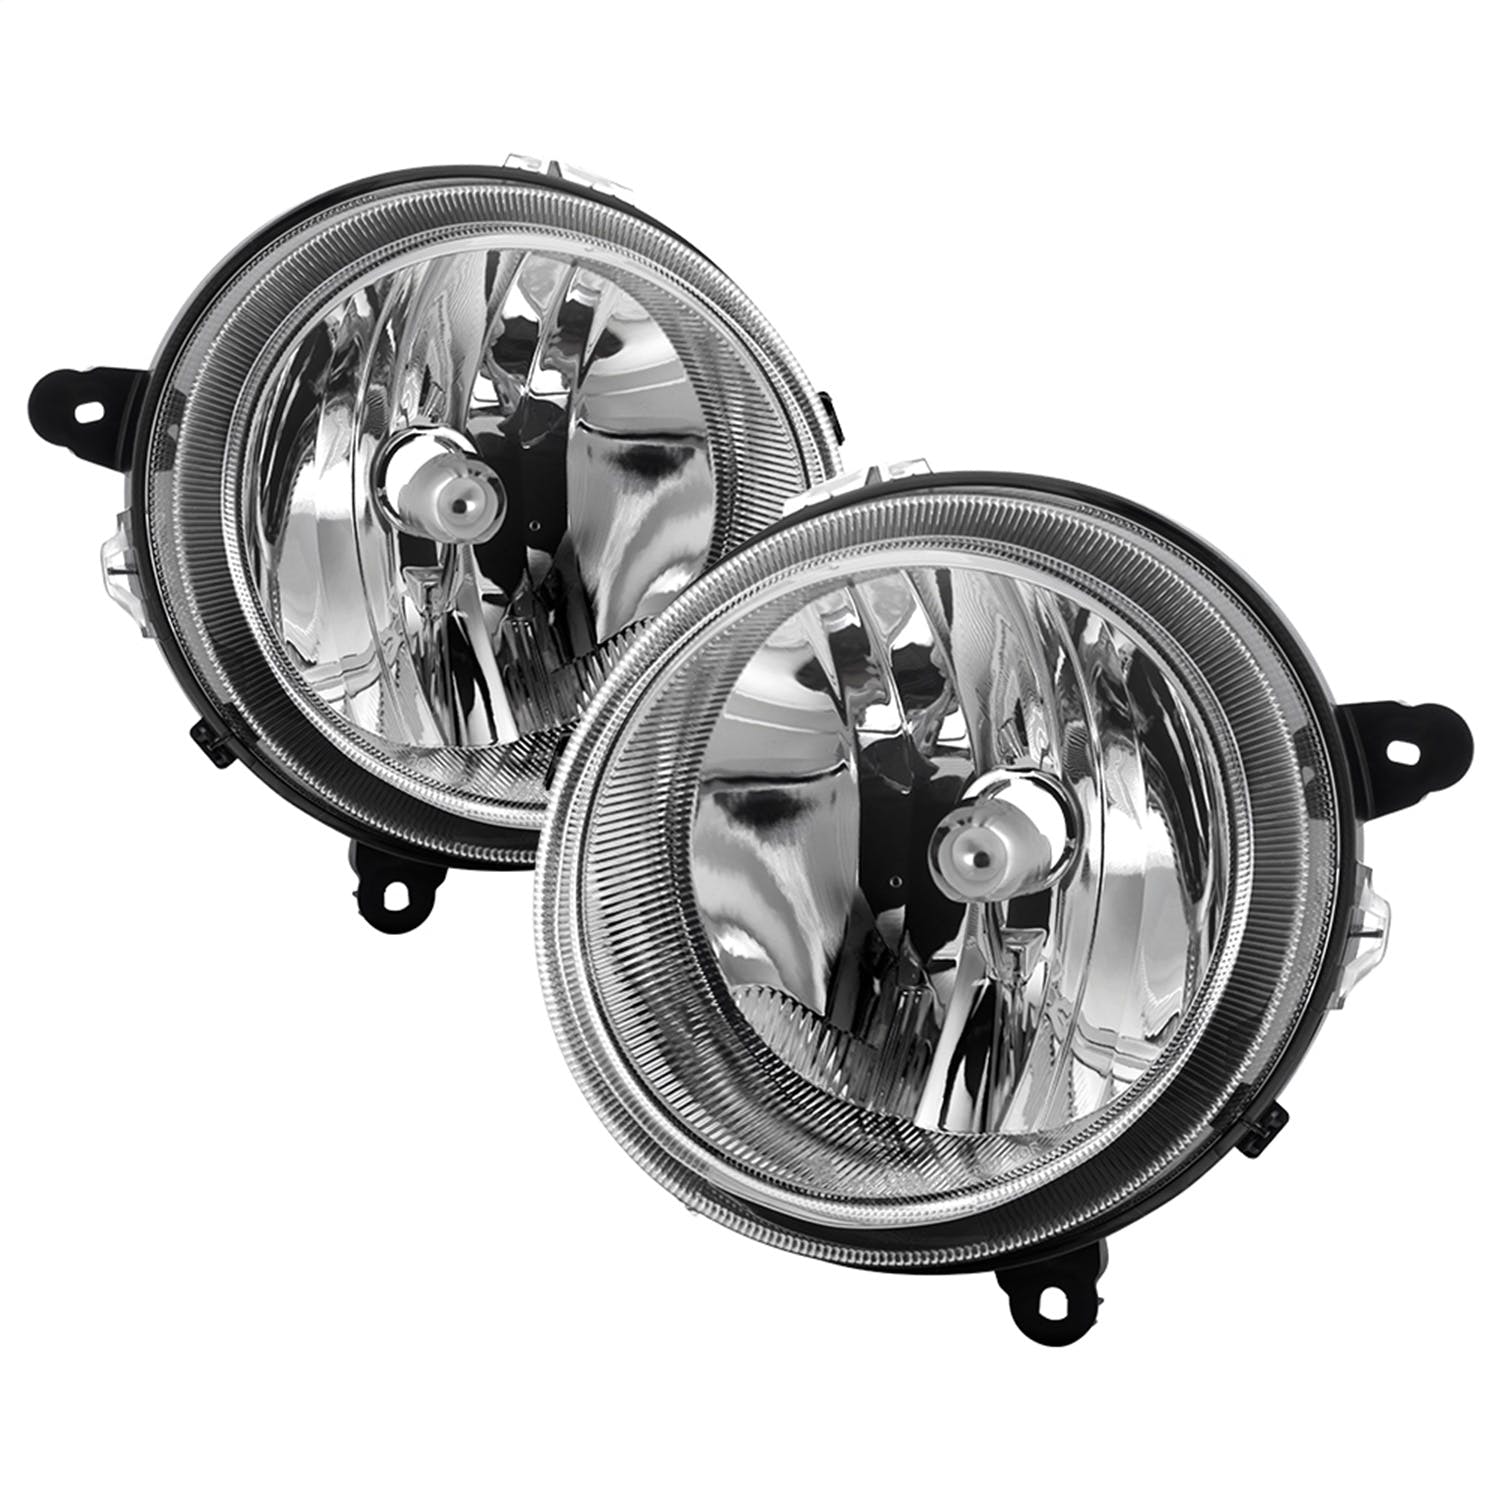 XTUNE POWER 9042751 Jeep Patriot 07 17 Jeep Compass 07 10 ( Does Not Fit Models With Automatic Leveling Headlights ) OEM Style Headlights Low Beam H13(Not Included) Chrome